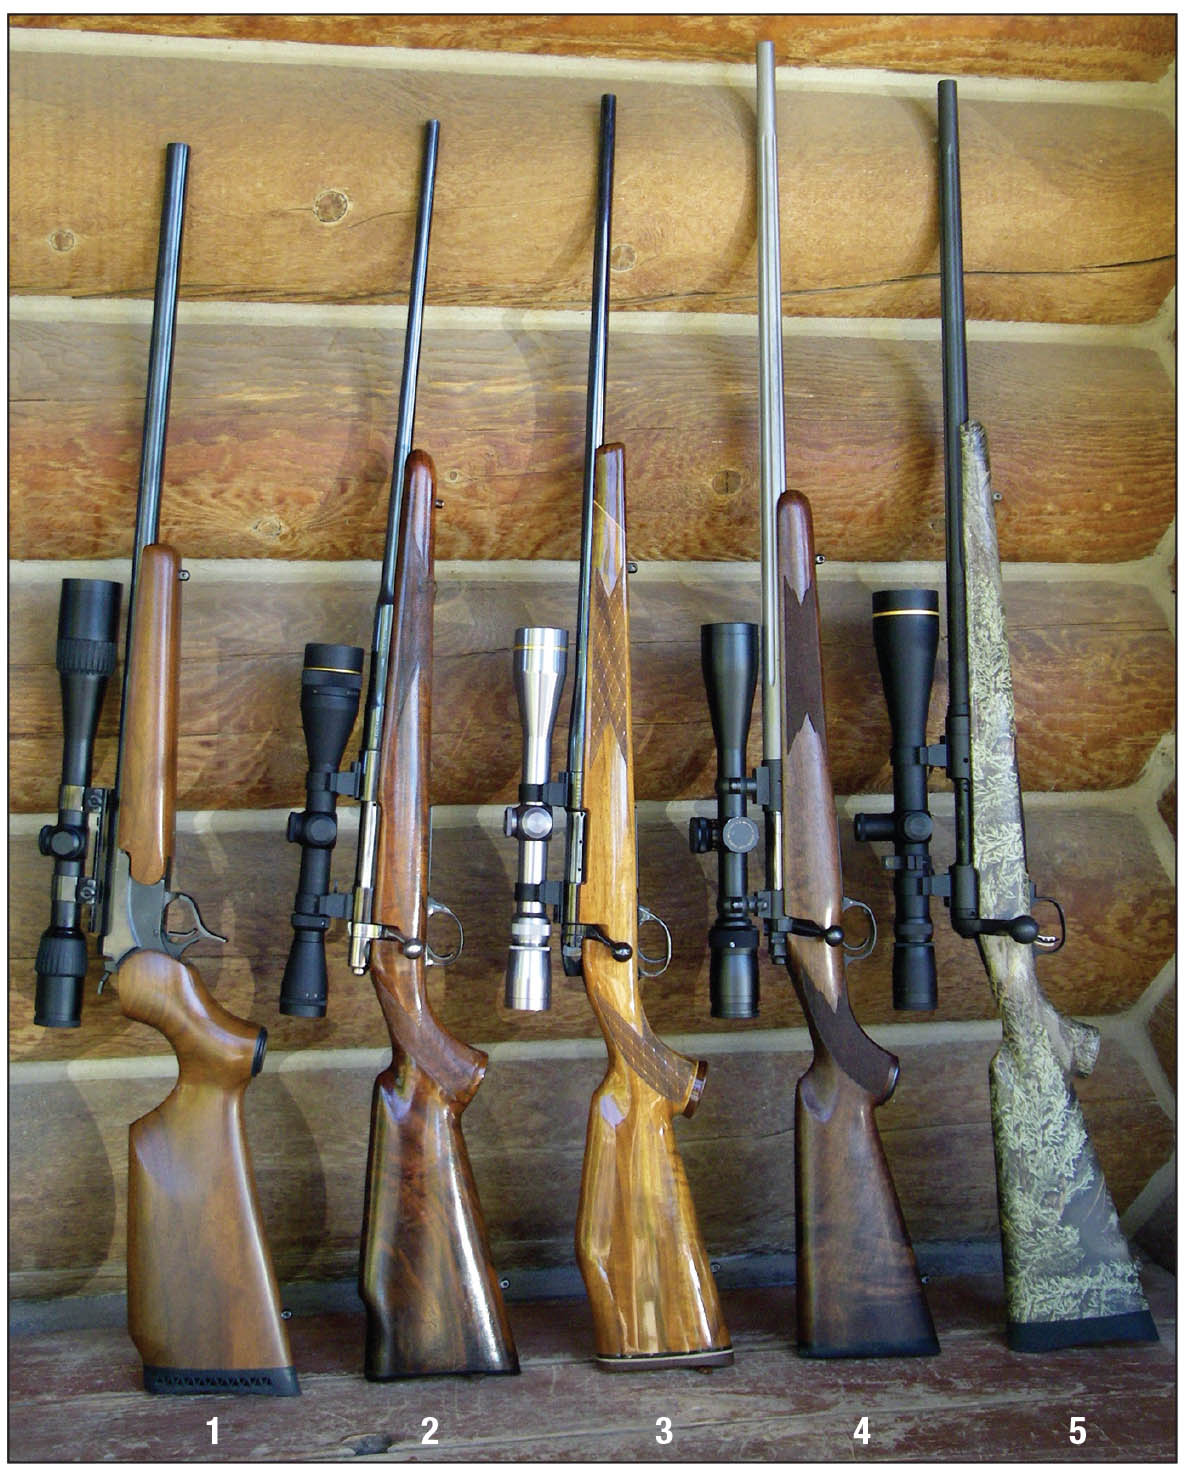 The .22-250 is chambered by many rifle manufacturers. Examples include a (1) Thompson/Center Arms Encore, (2) Browning High Power with Sako action, (3) Weatherby Mark V Varmint Master, (4) Kimber 84M and a (5) Savage Model 10.